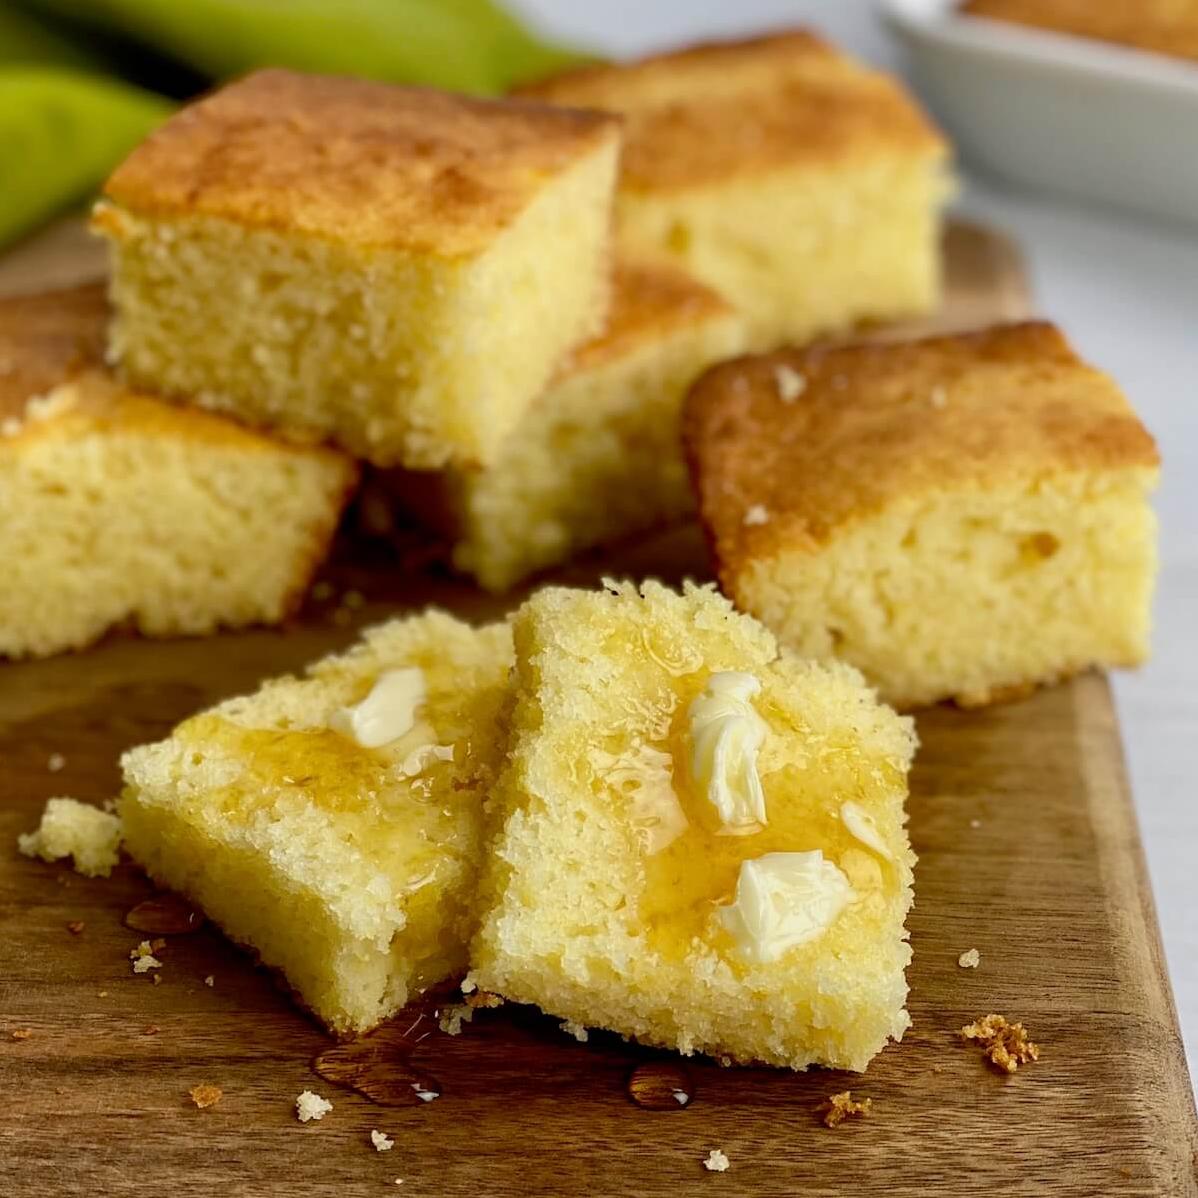  Why settle for dull and boring when you can have this perfectly moist and delicious cornbread?